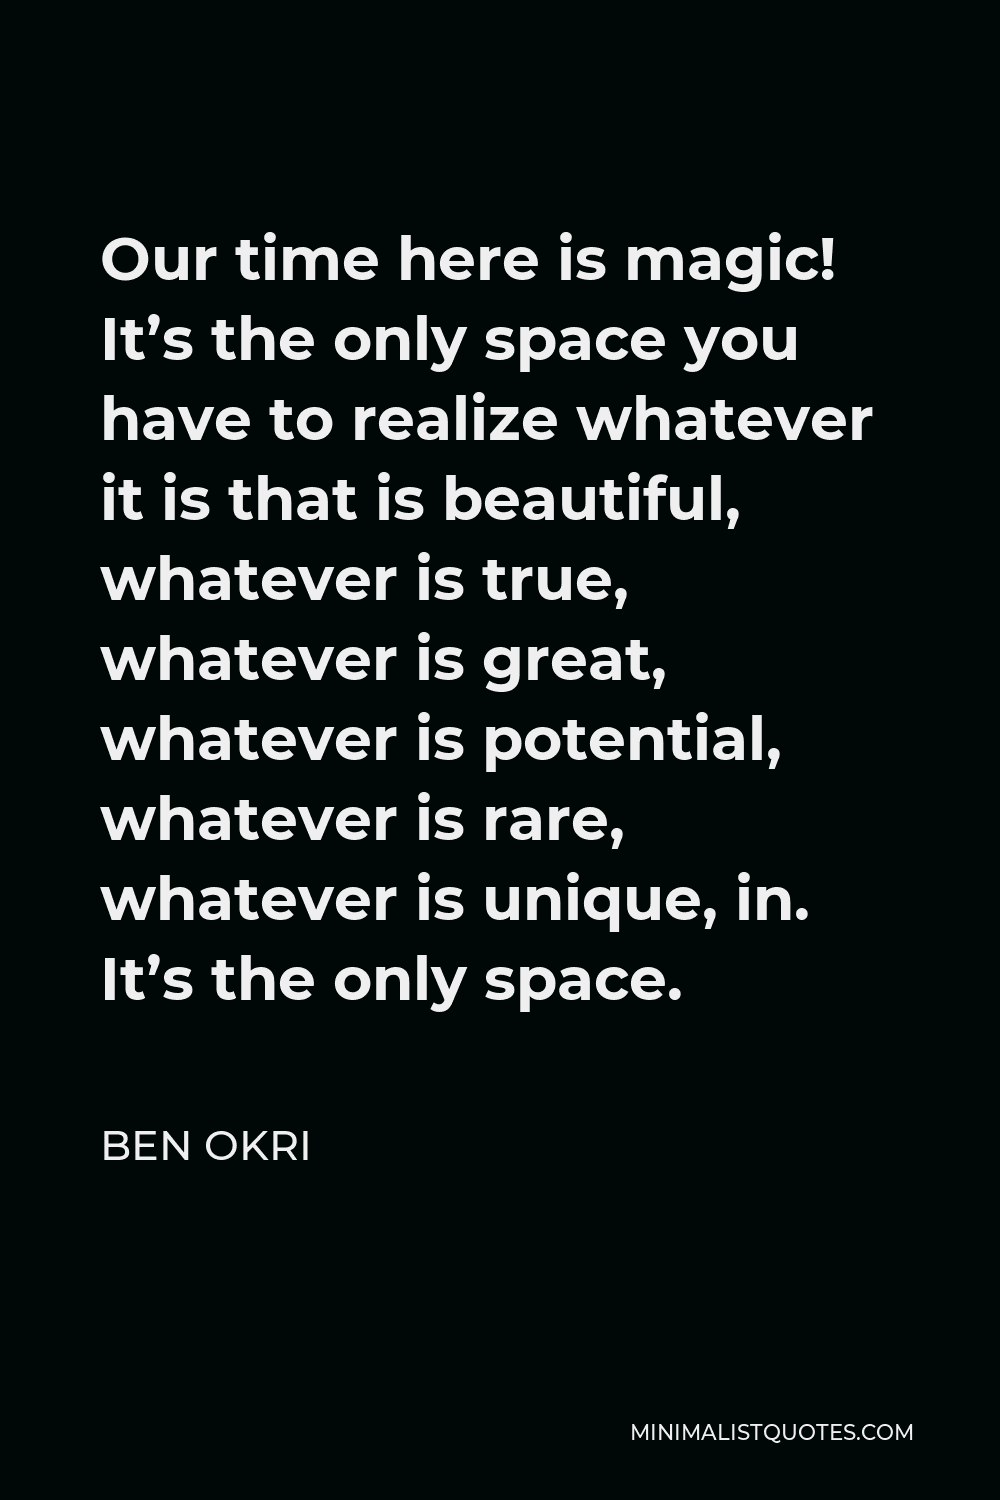 Ben Okri Quote - Our time here is magic! It’s the only space you have to realize whatever it is that is beautiful, whatever is true, whatever is great, whatever is potential, whatever is rare, whatever is unique, in. It’s the only space.